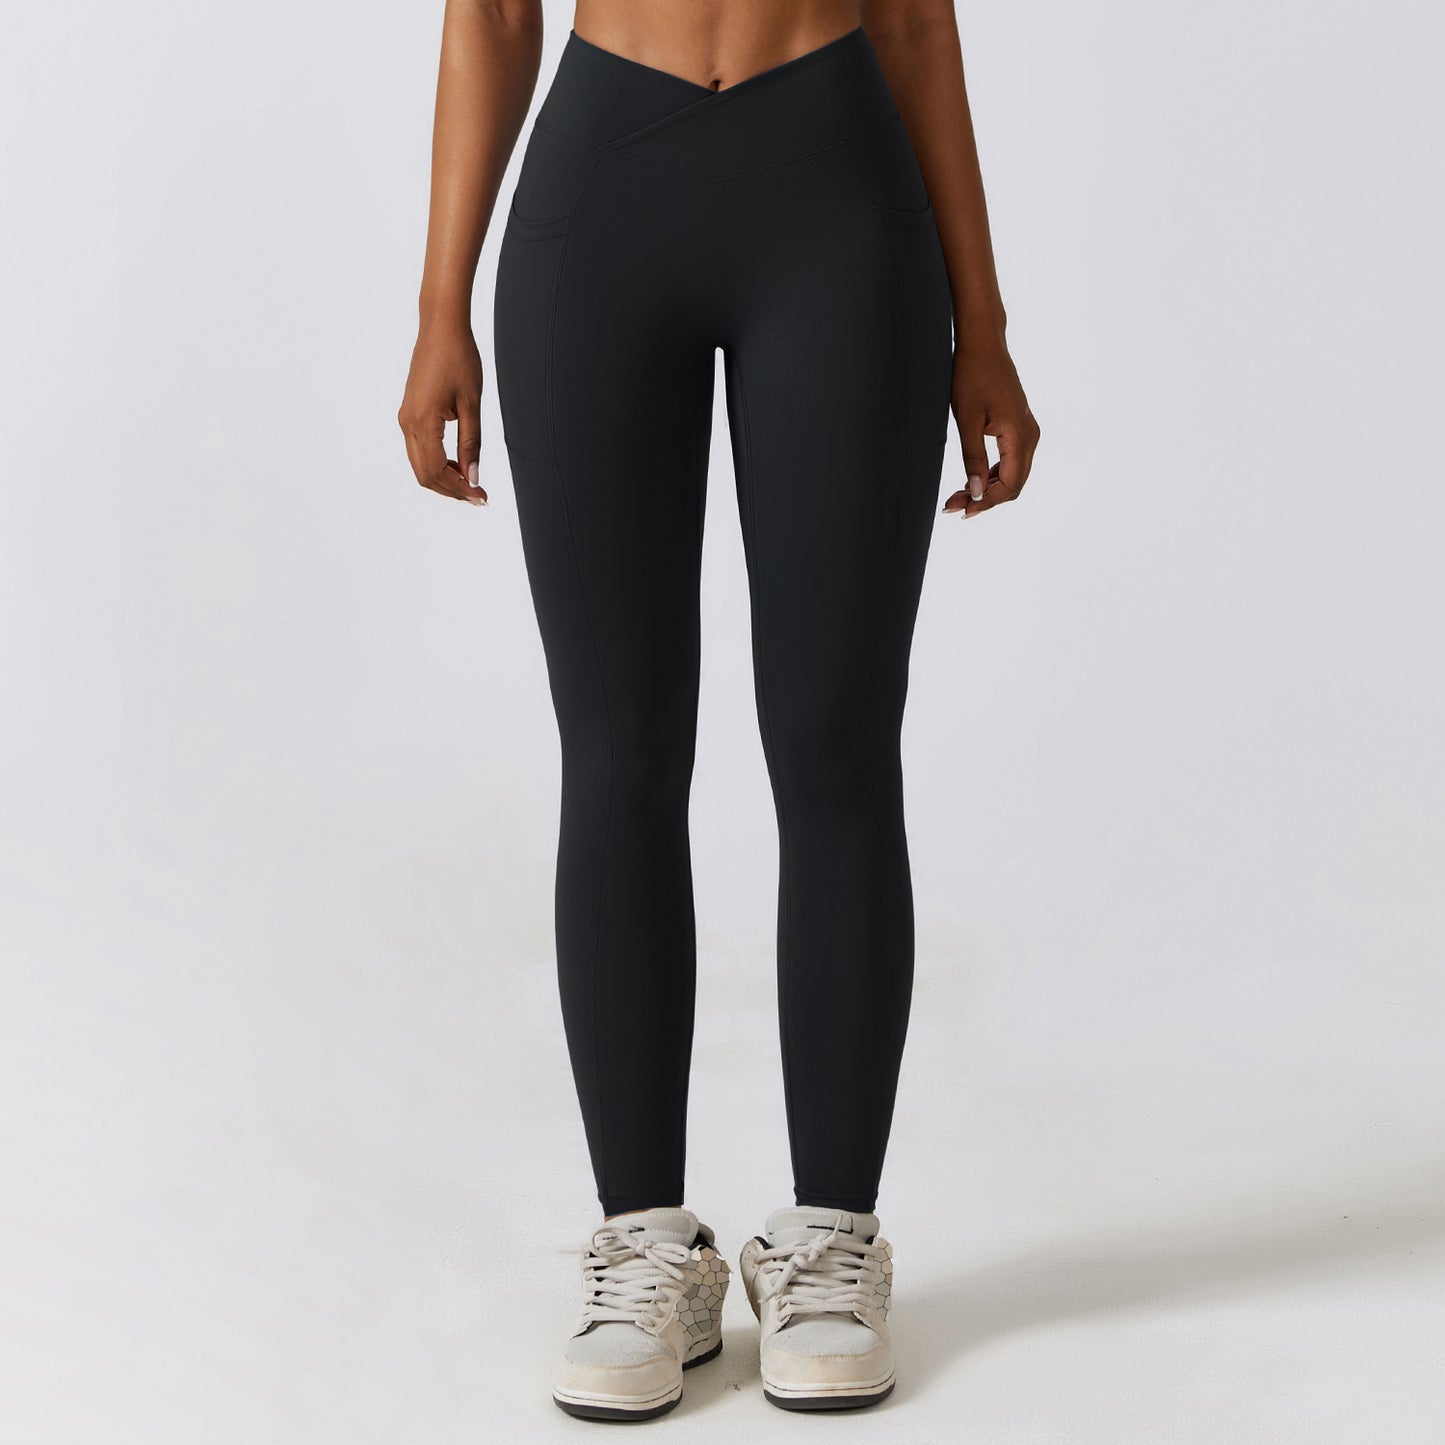 Hip Raise Fitness Pants Women's Quick-drying Tight Sports - myETYN